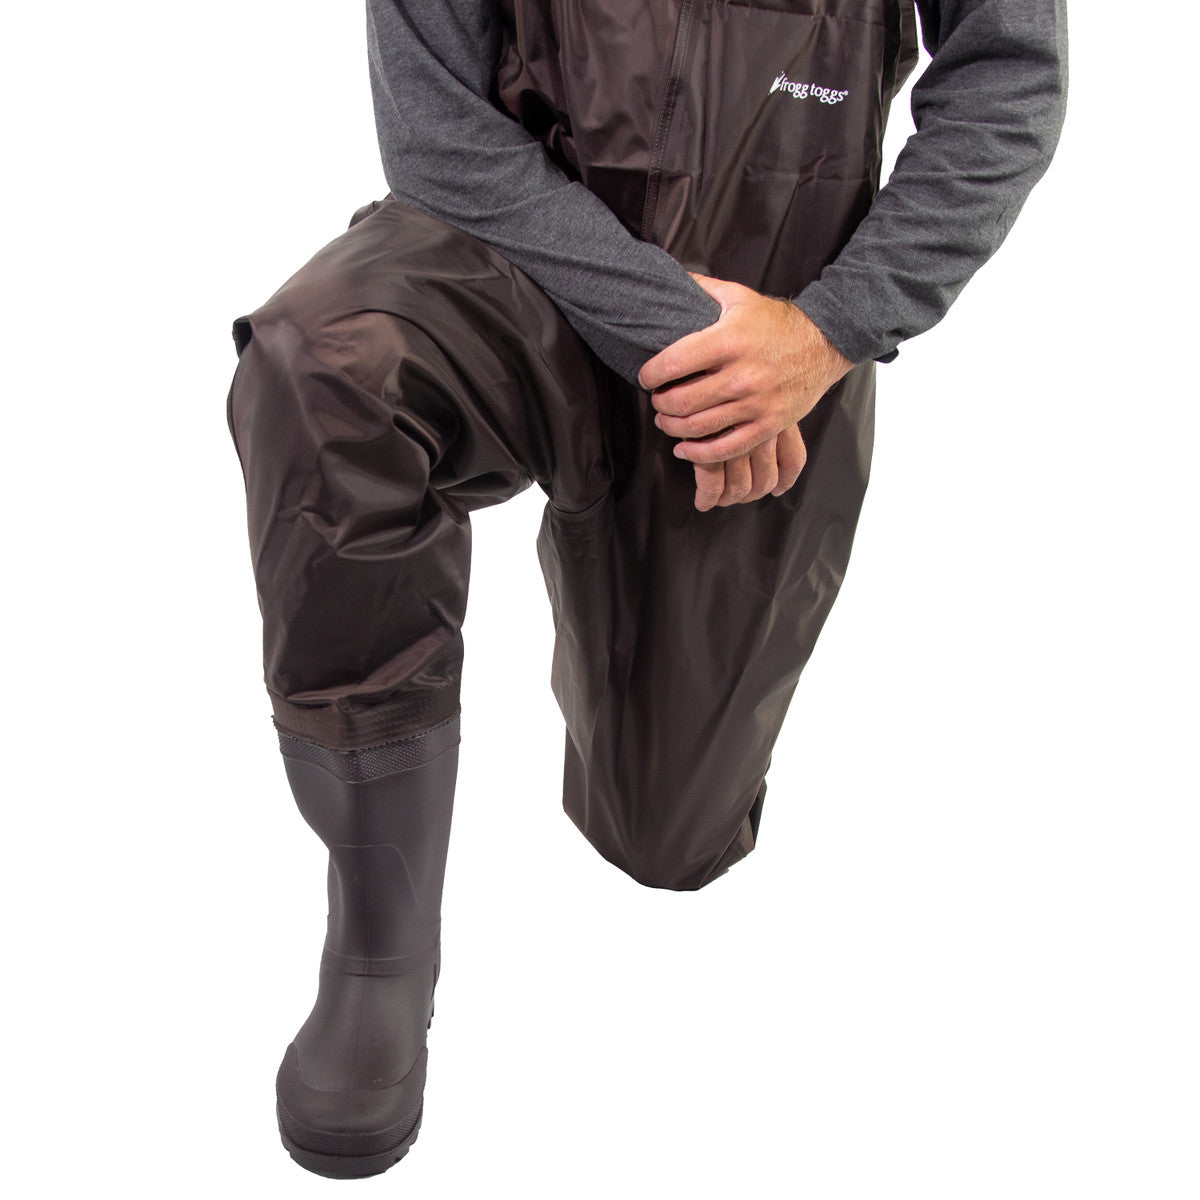 Frogg Toggs Men's Rana II PVC Cleated Chest Wader, Brown